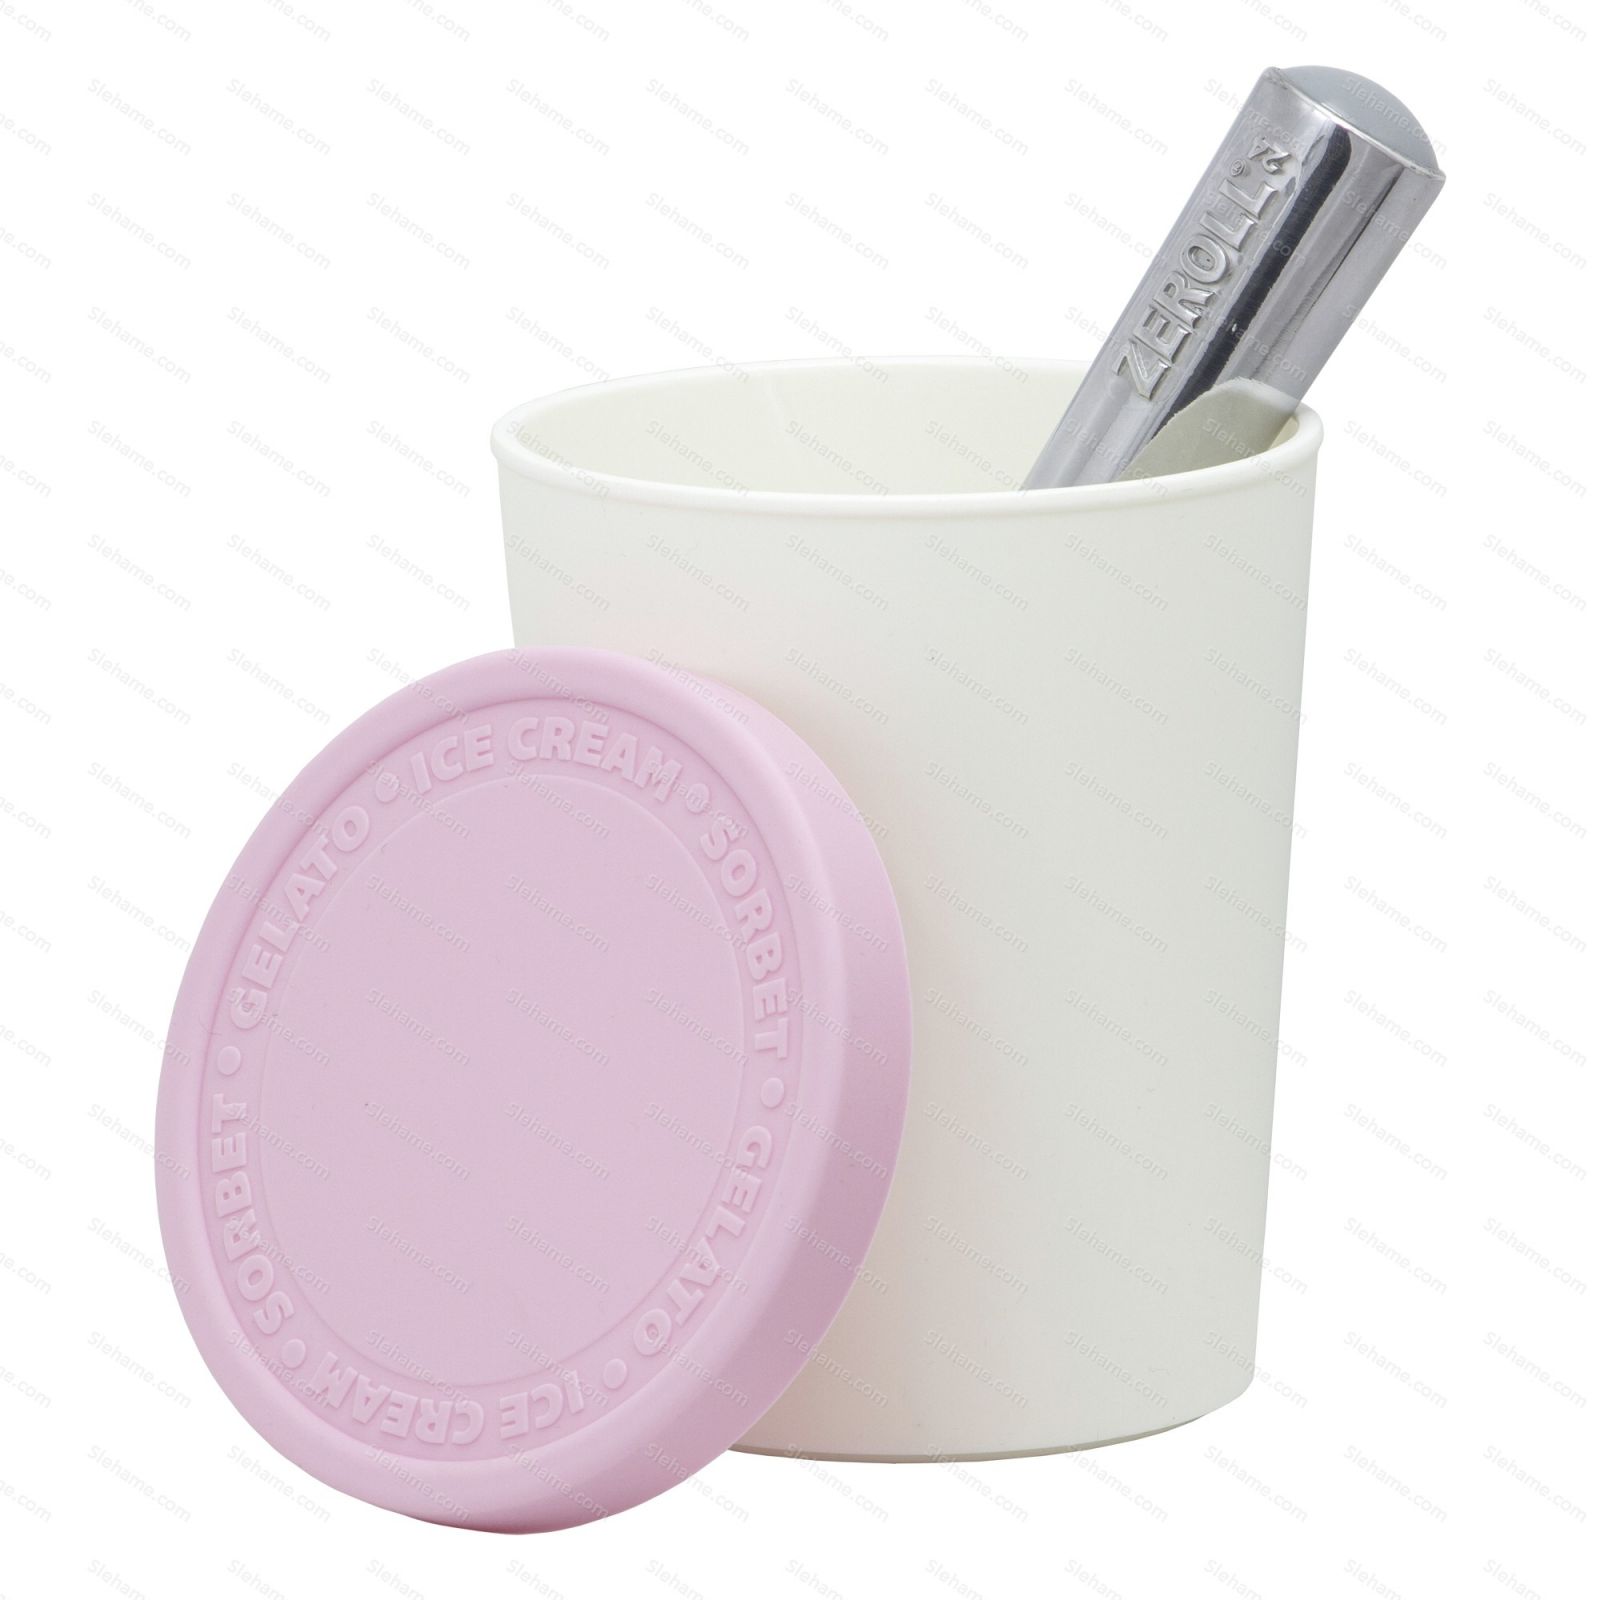 Tovolo Sweet Treats Ice Cream Storage Tub 1 Quart Sorbet Gelato Container -  Pink for sale online